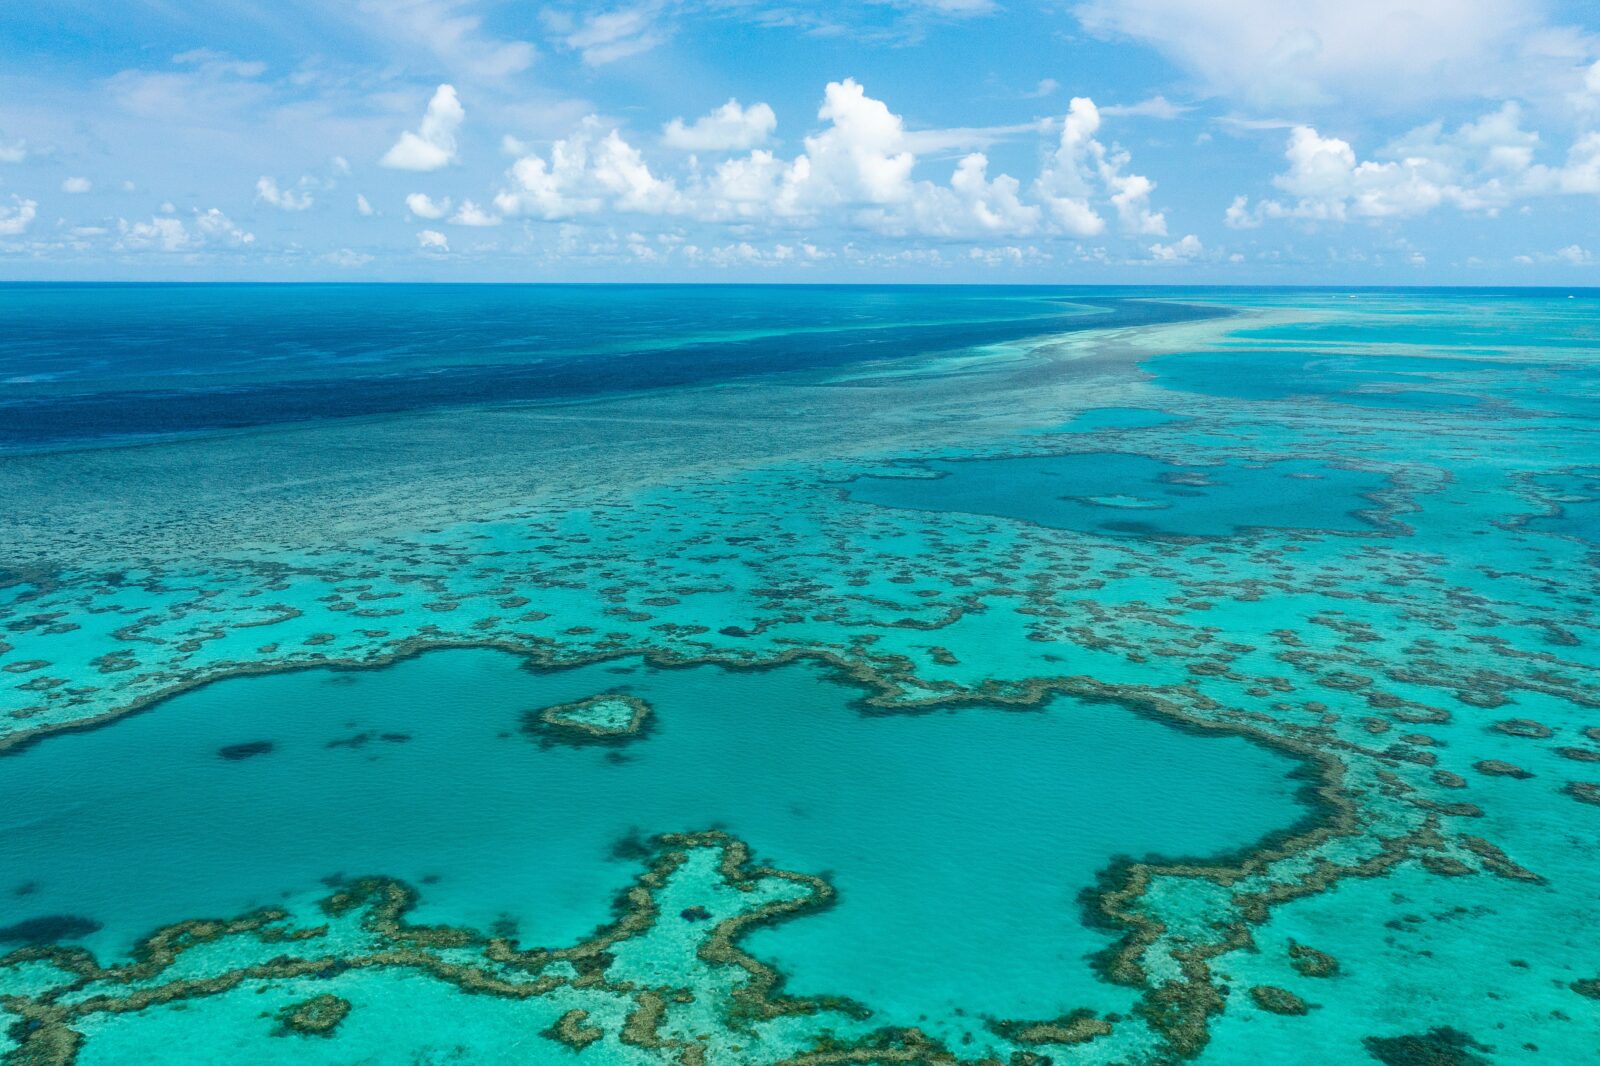 Aerial view of the calm turquoise waters and the endless reef during low ocean tide